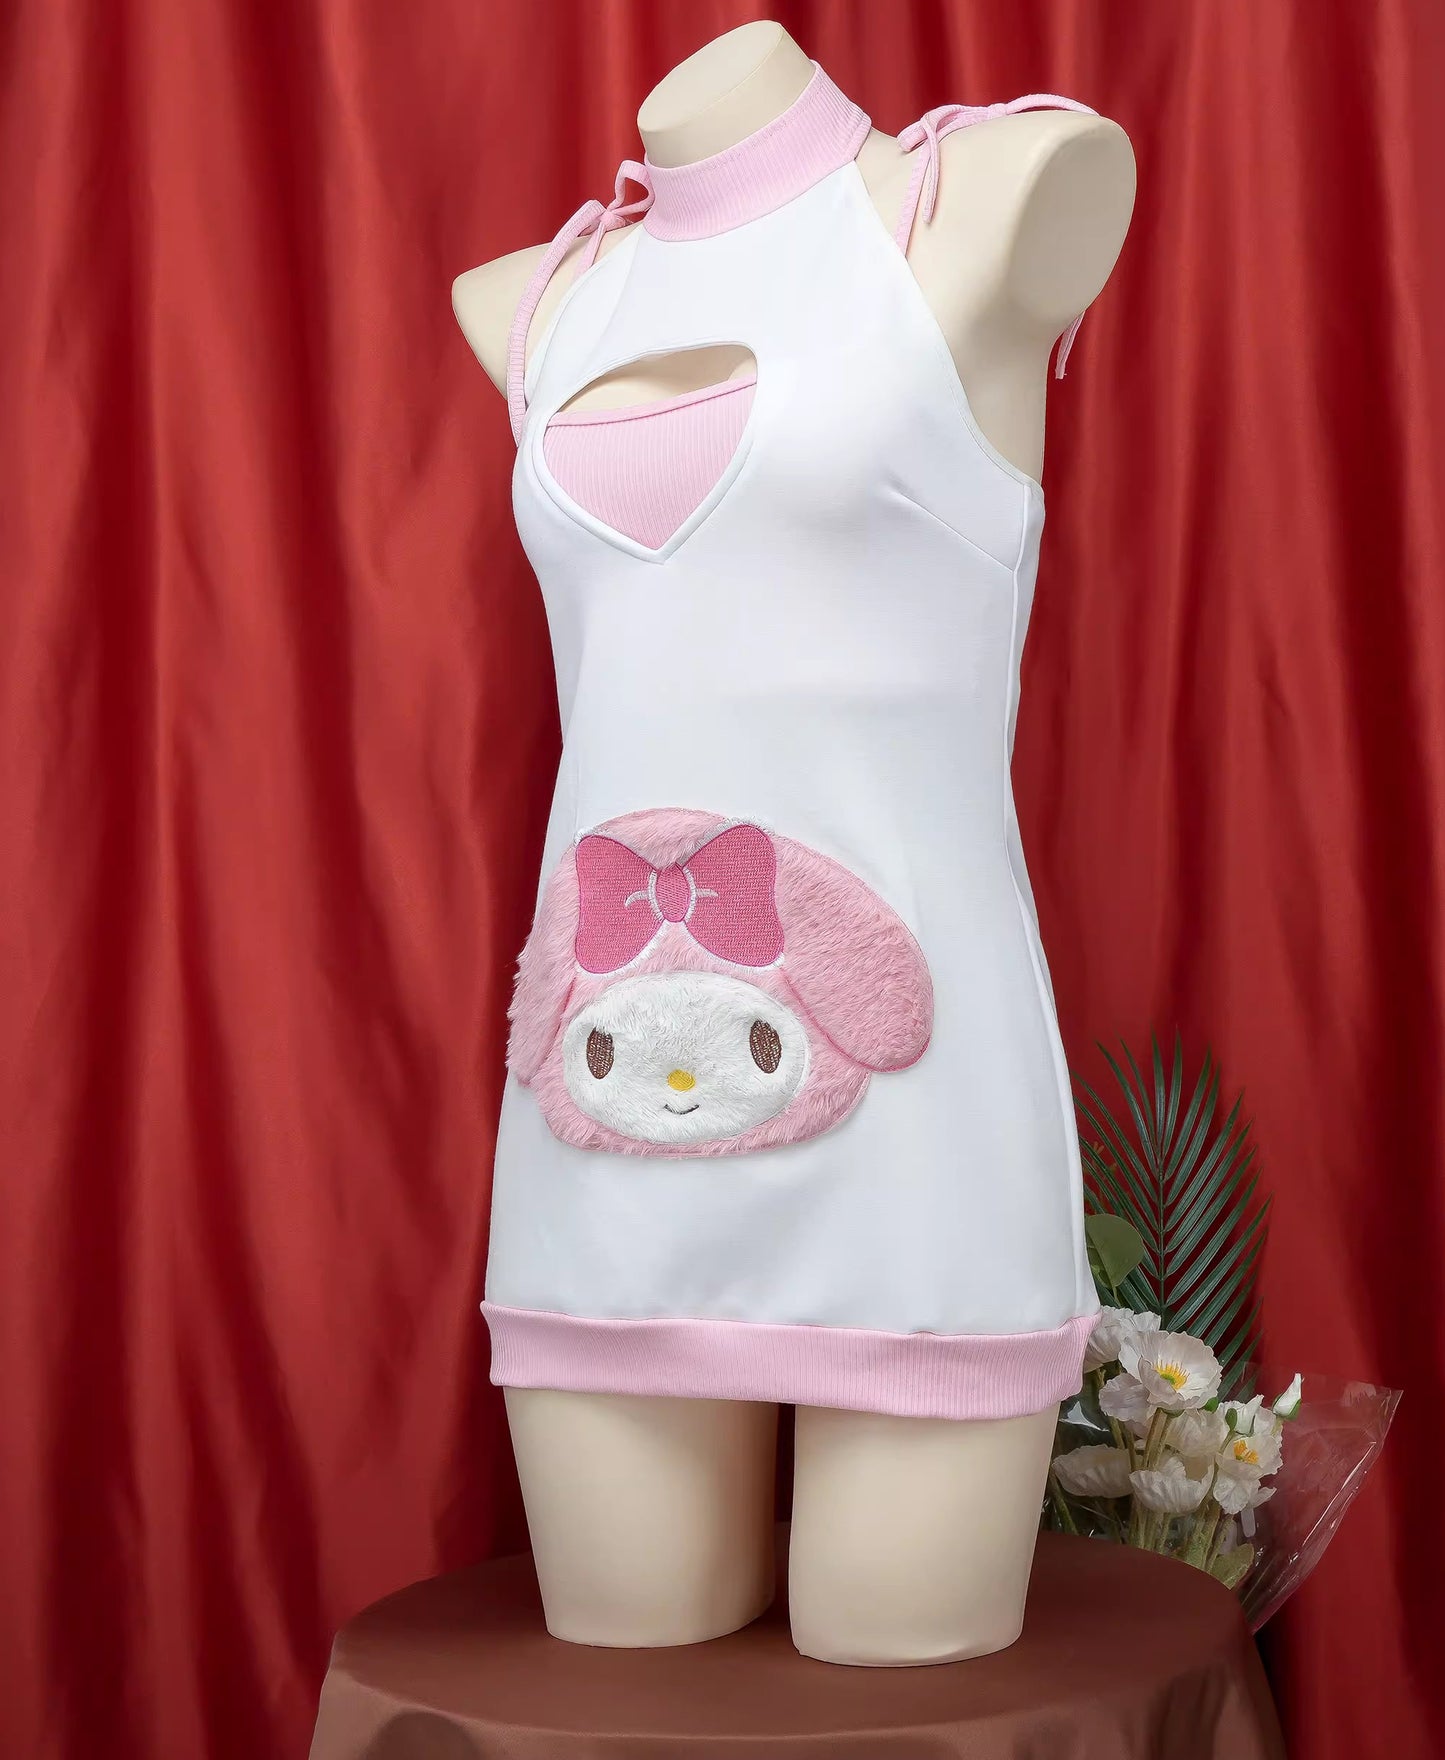 Magic bunny embroidered nightgown AP125